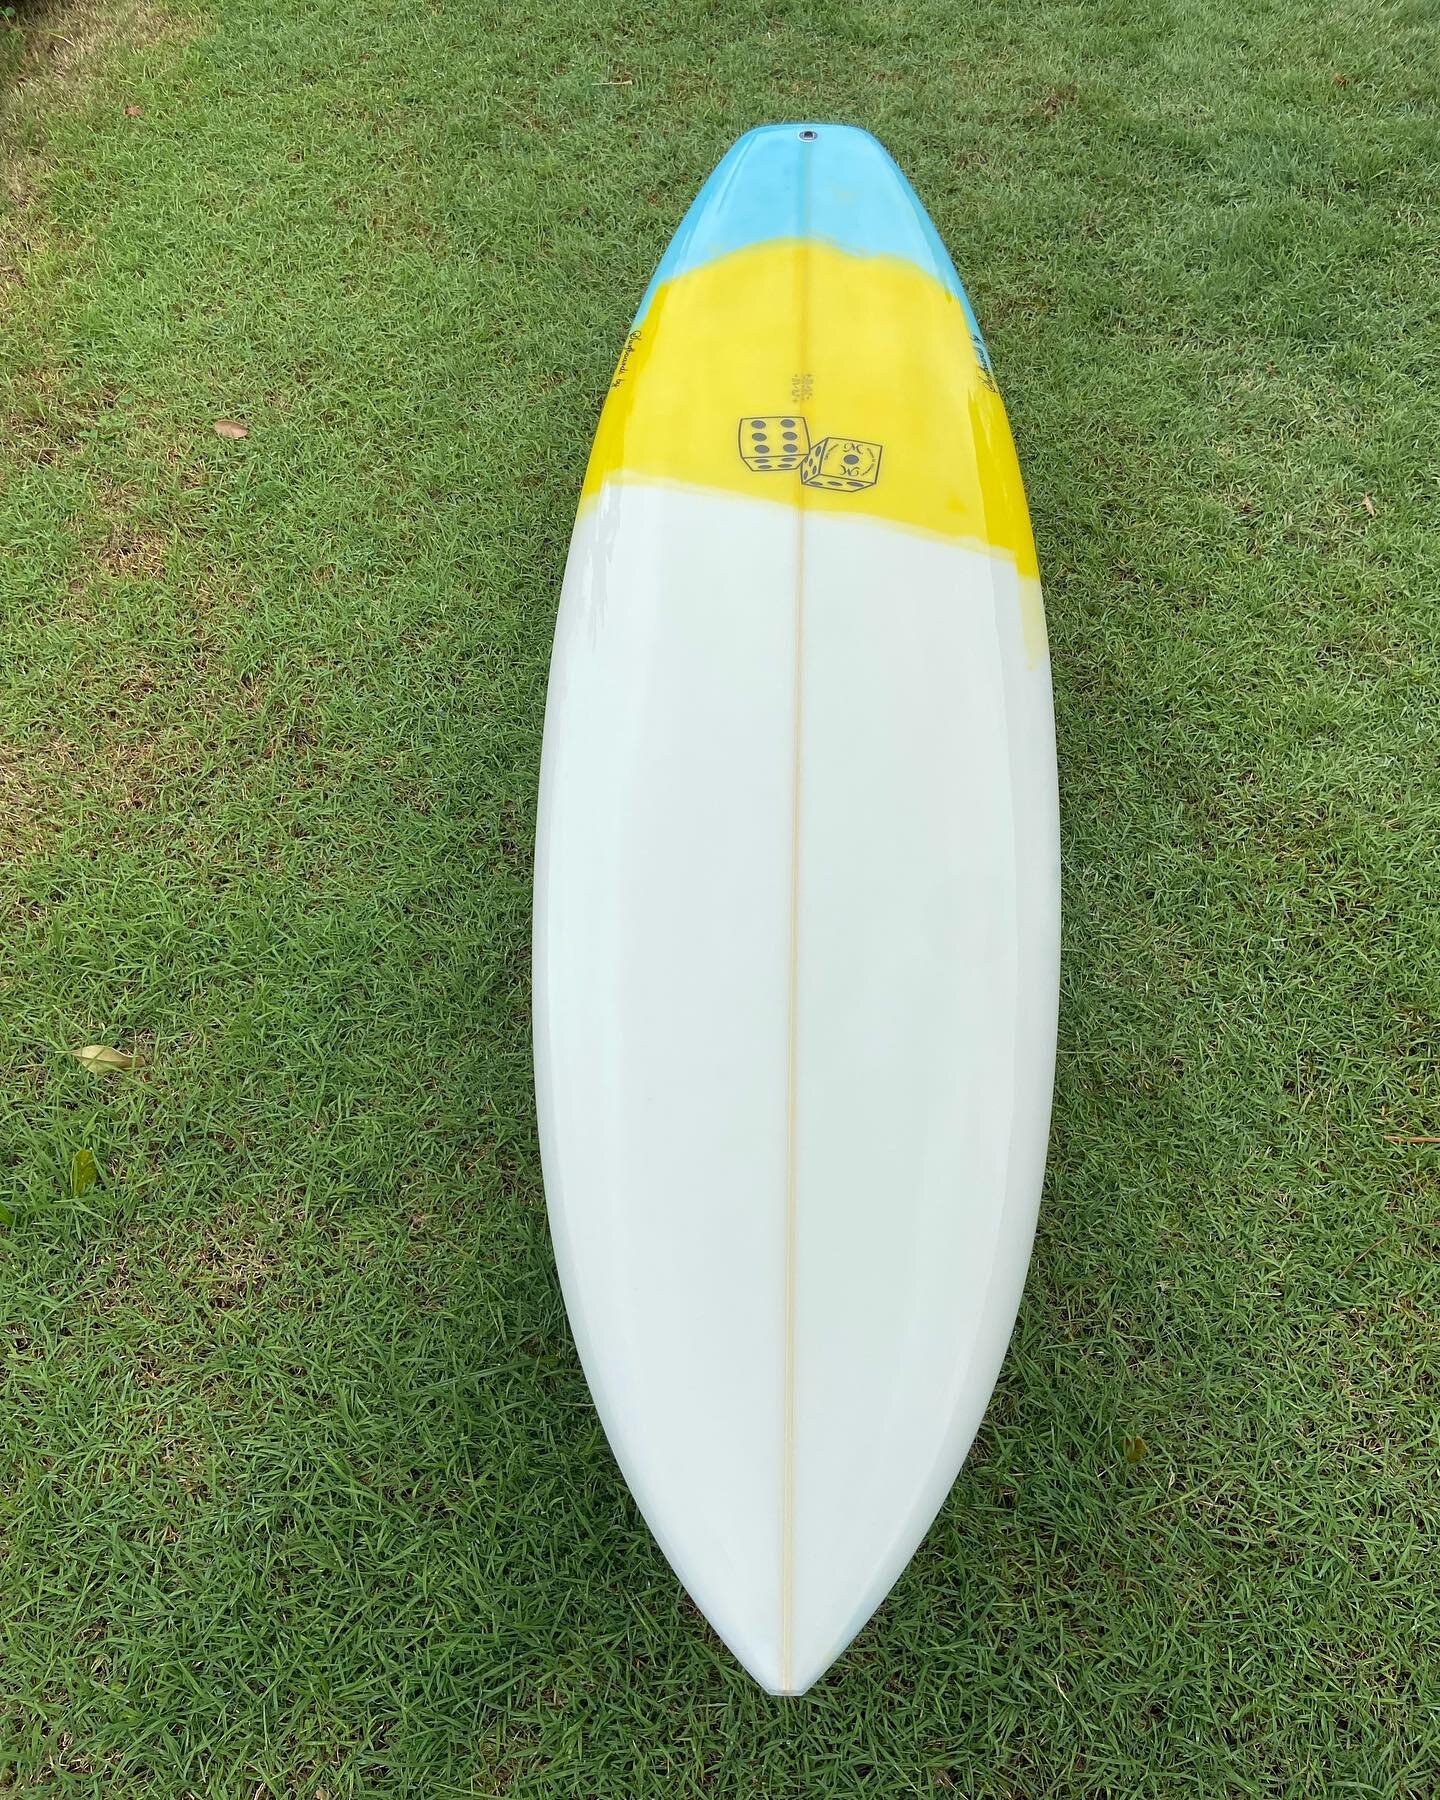 6&rsquo;0&rdquo;x19 ⅛ x 2 ⅜ #handshape #custom very clean shape, more forward volume, single to double concave with vee off the tail, glassed with resin color , glossed and polished  for @millerjim  who purchased one of my boards @alohaboardshop808 w